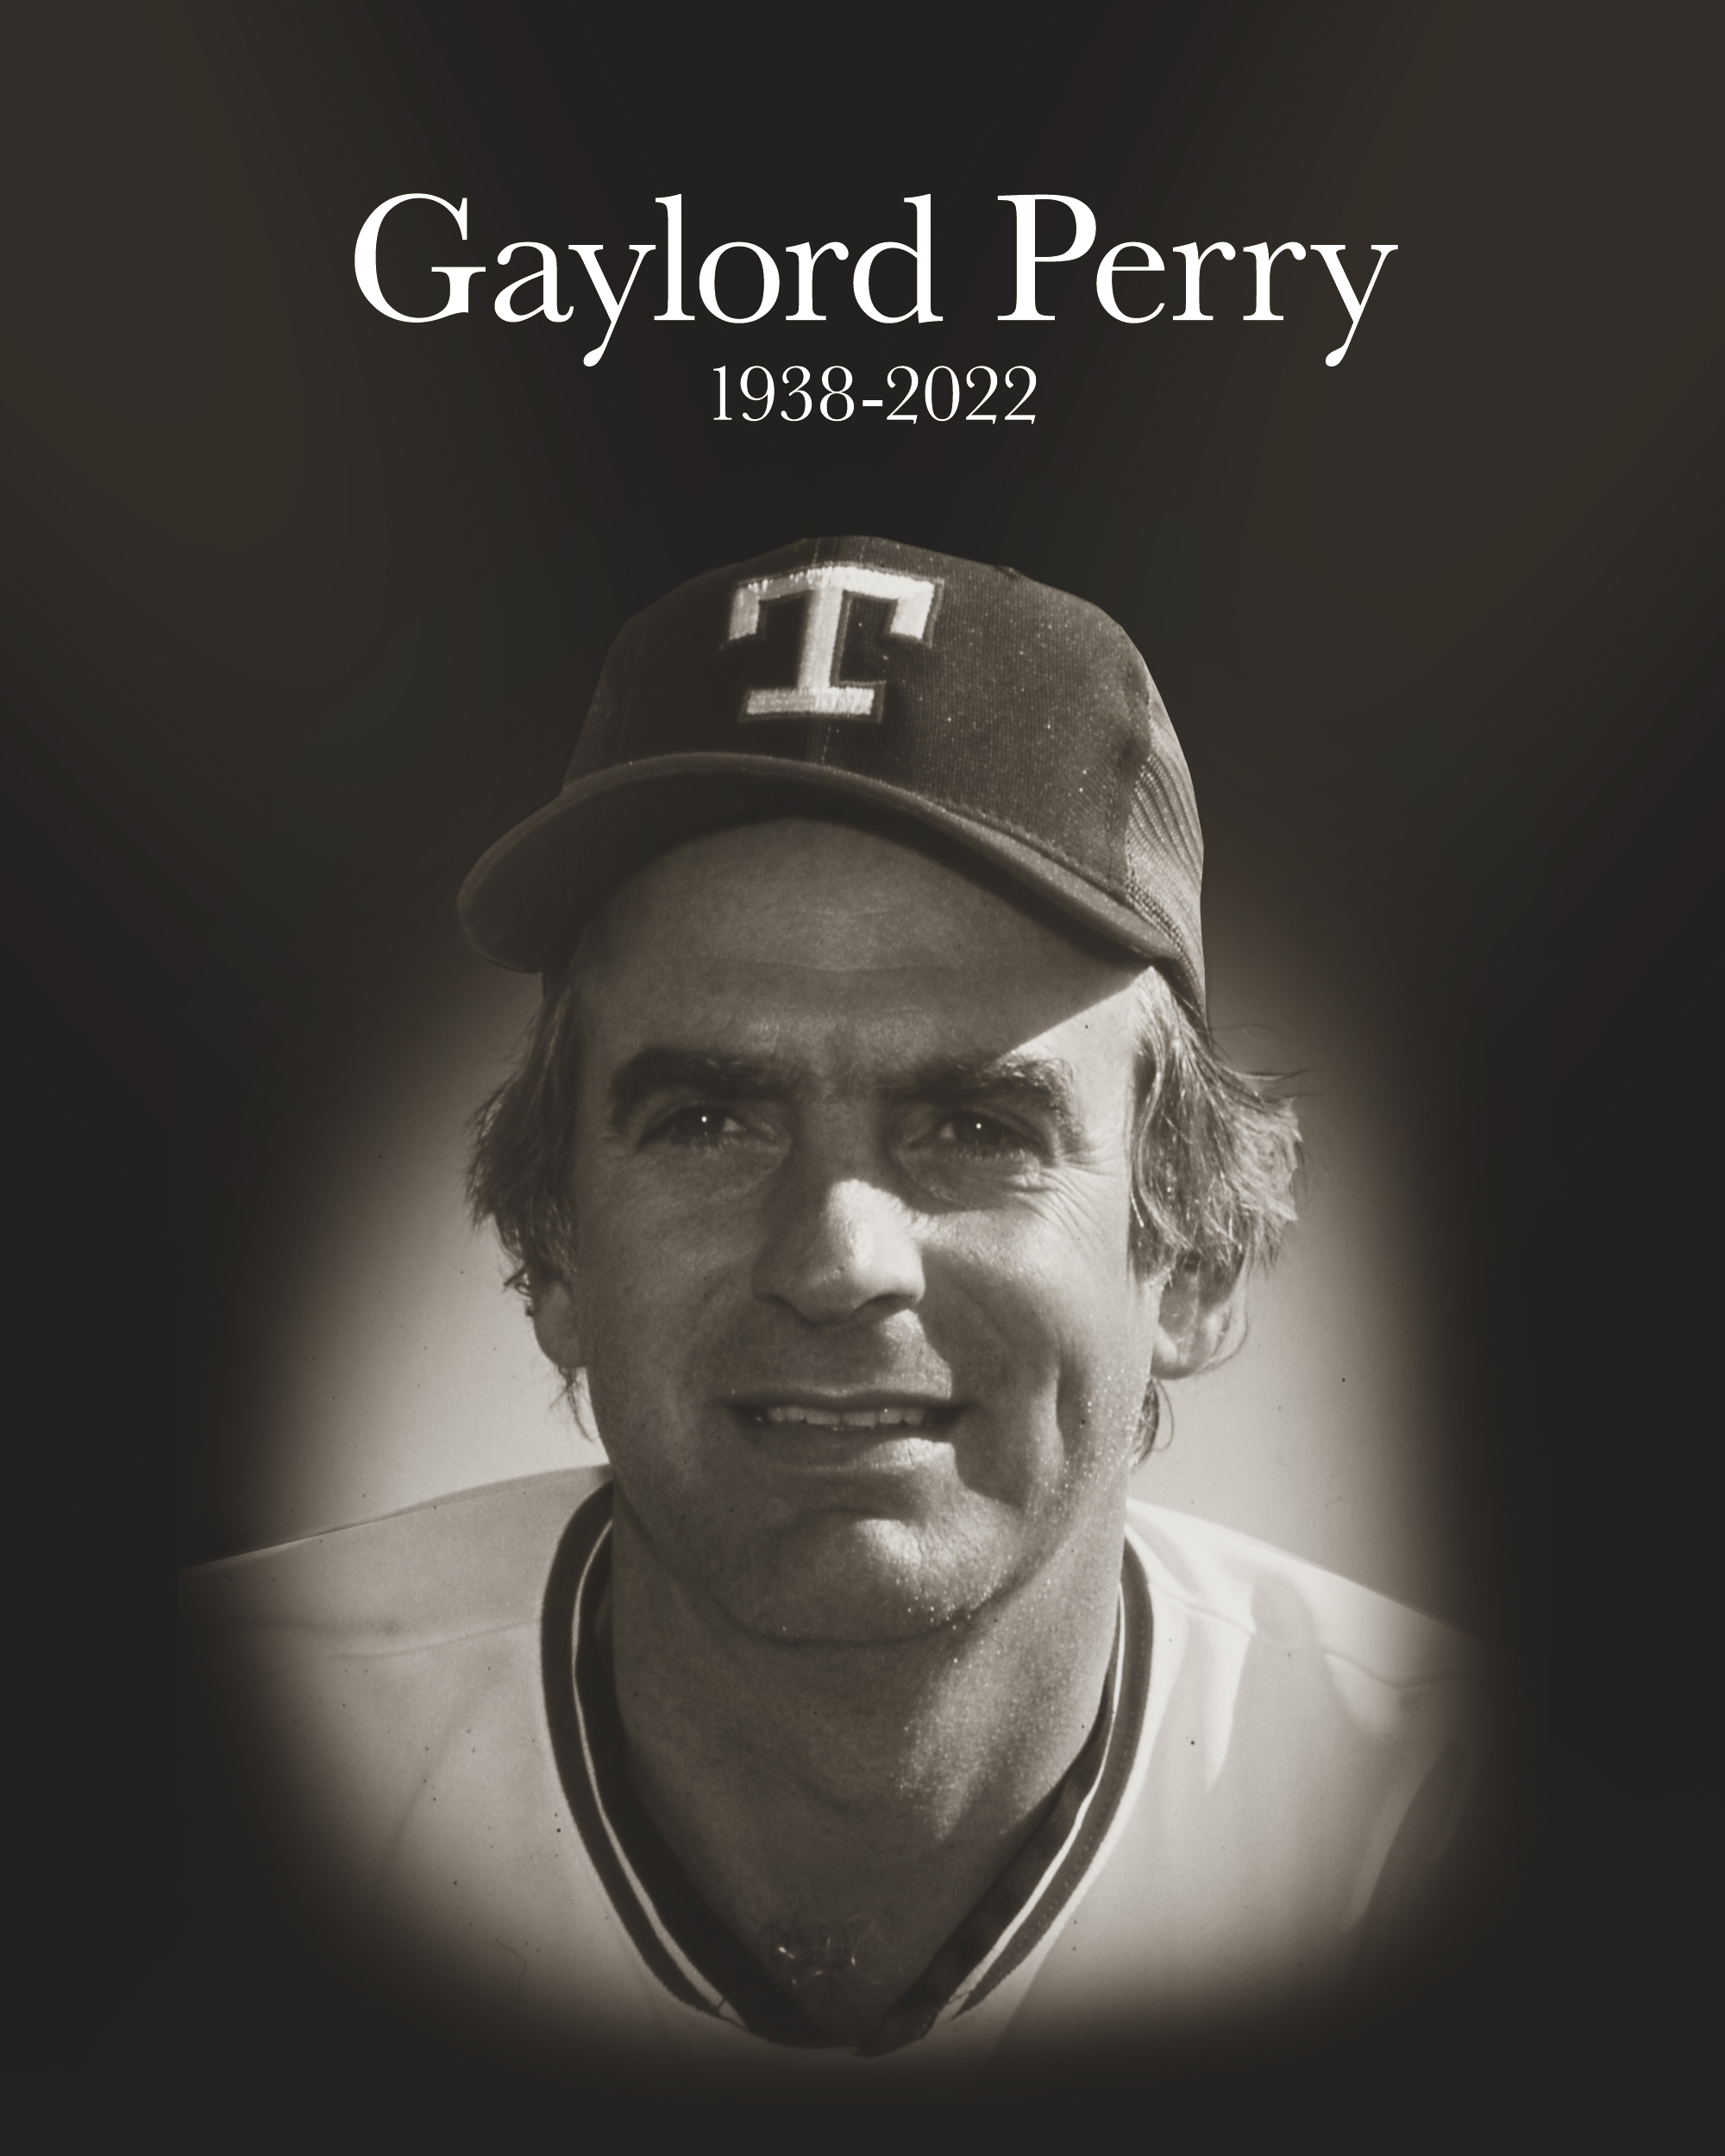 gaylord perry 2022